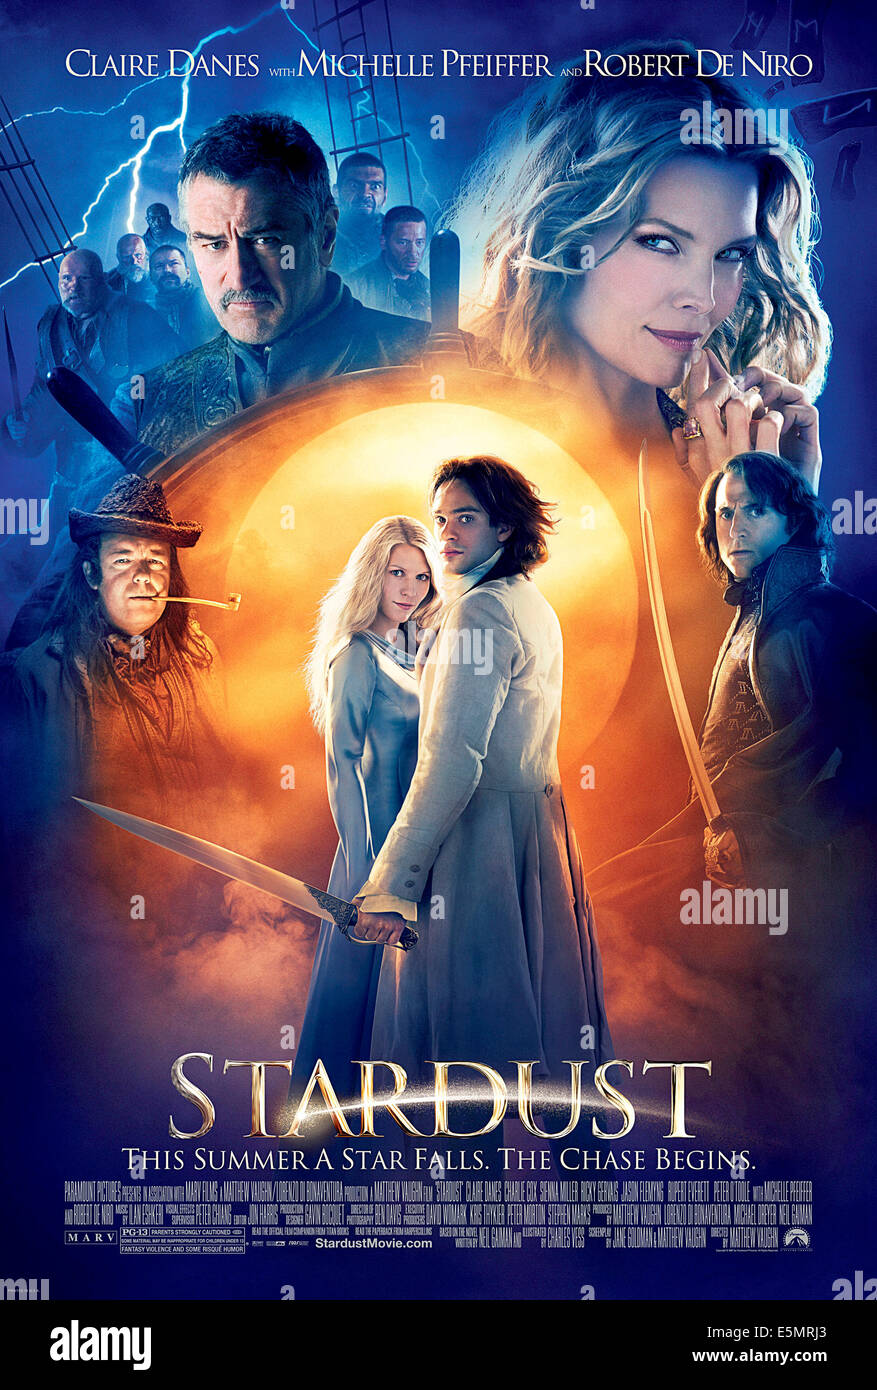 STARDUST, clockwise from lower left: Ricky Gervais, Robert DeNiro, Michelle Pfeiffer, Mark Strong, Charlie Cox, Claire Danes, Stock Photo